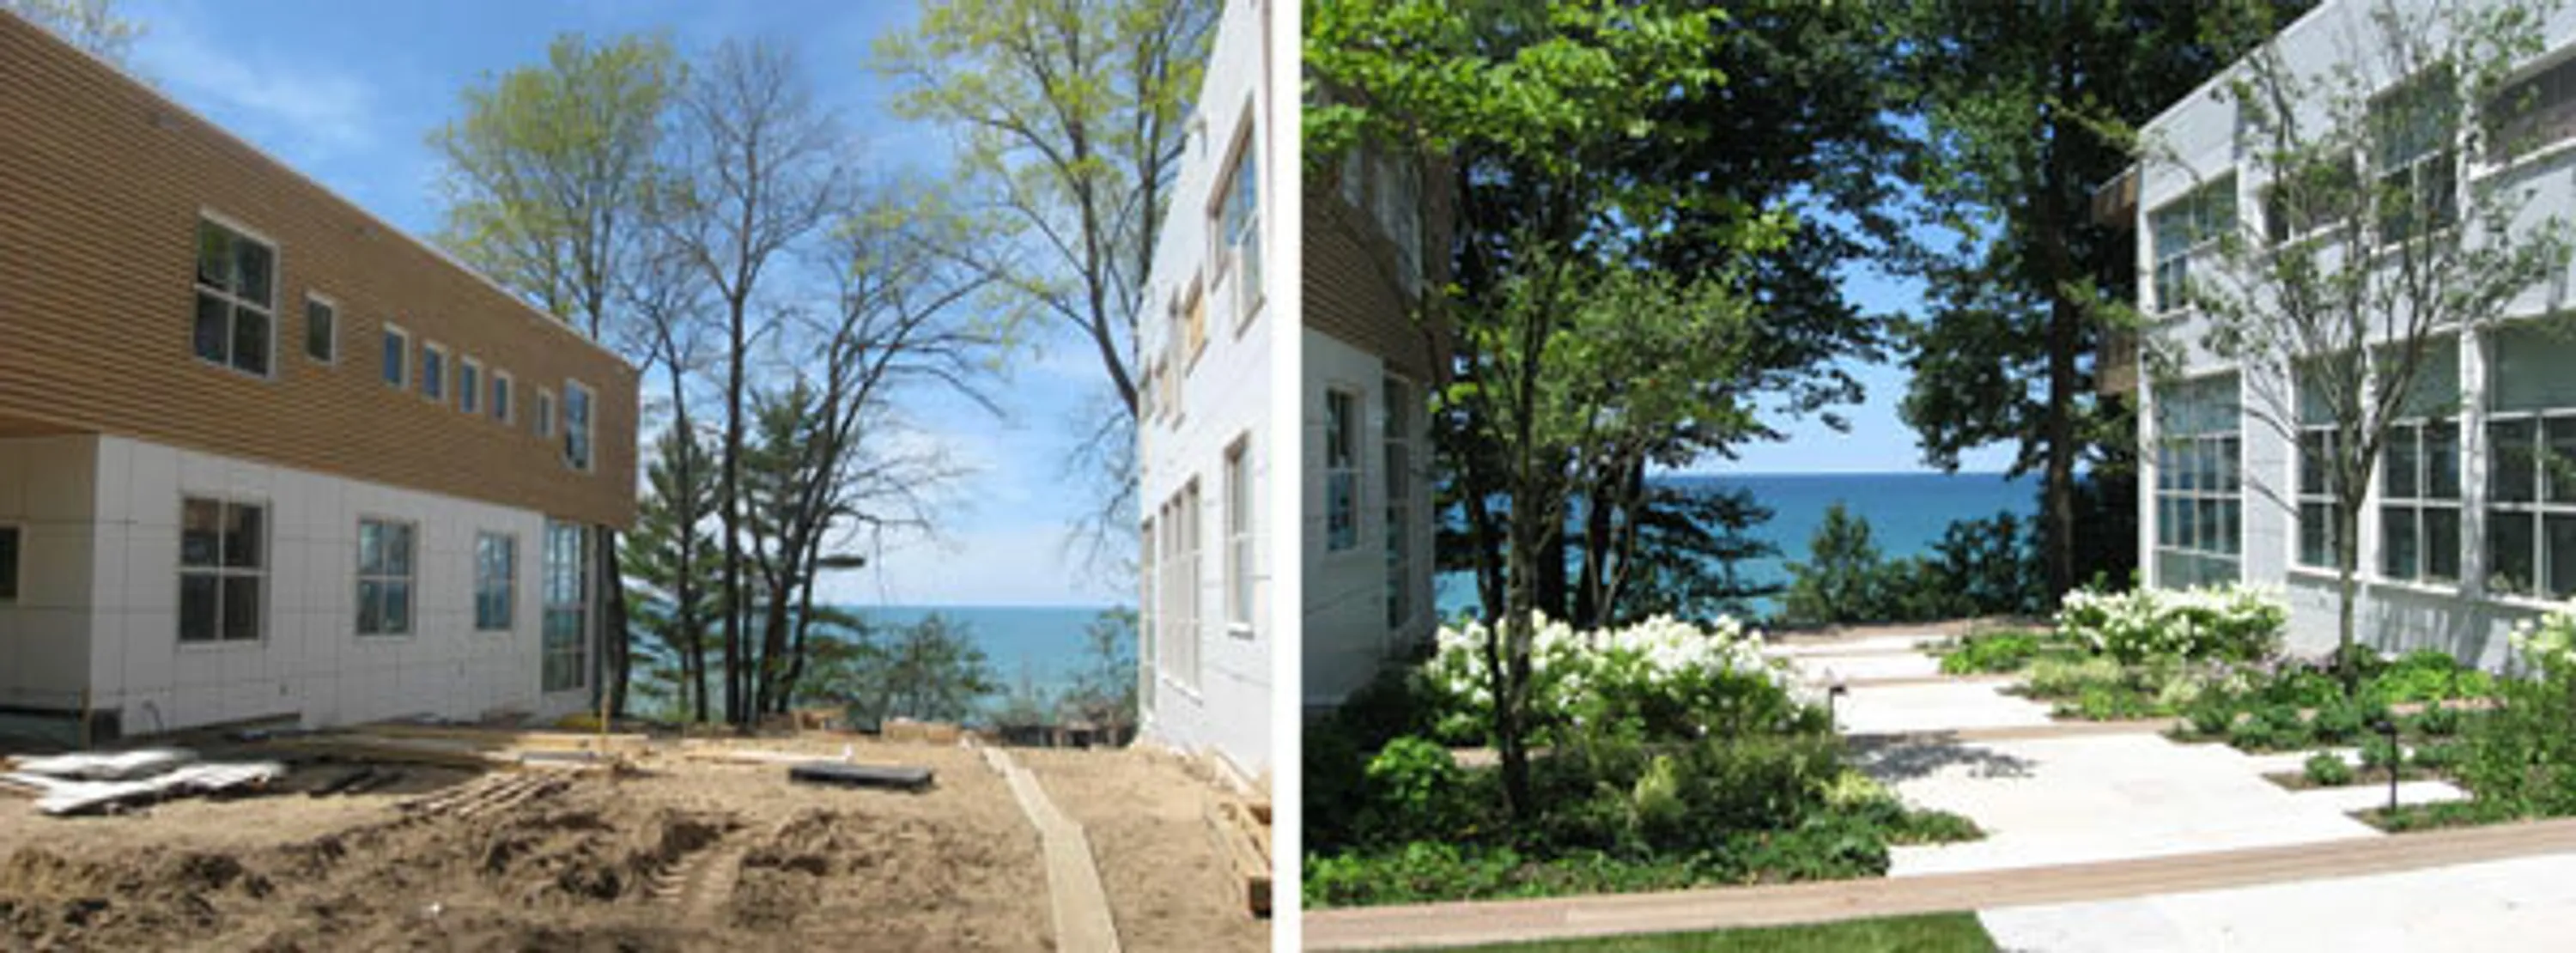 1 before after lake view family courtyard lake blog hoerrschaudt